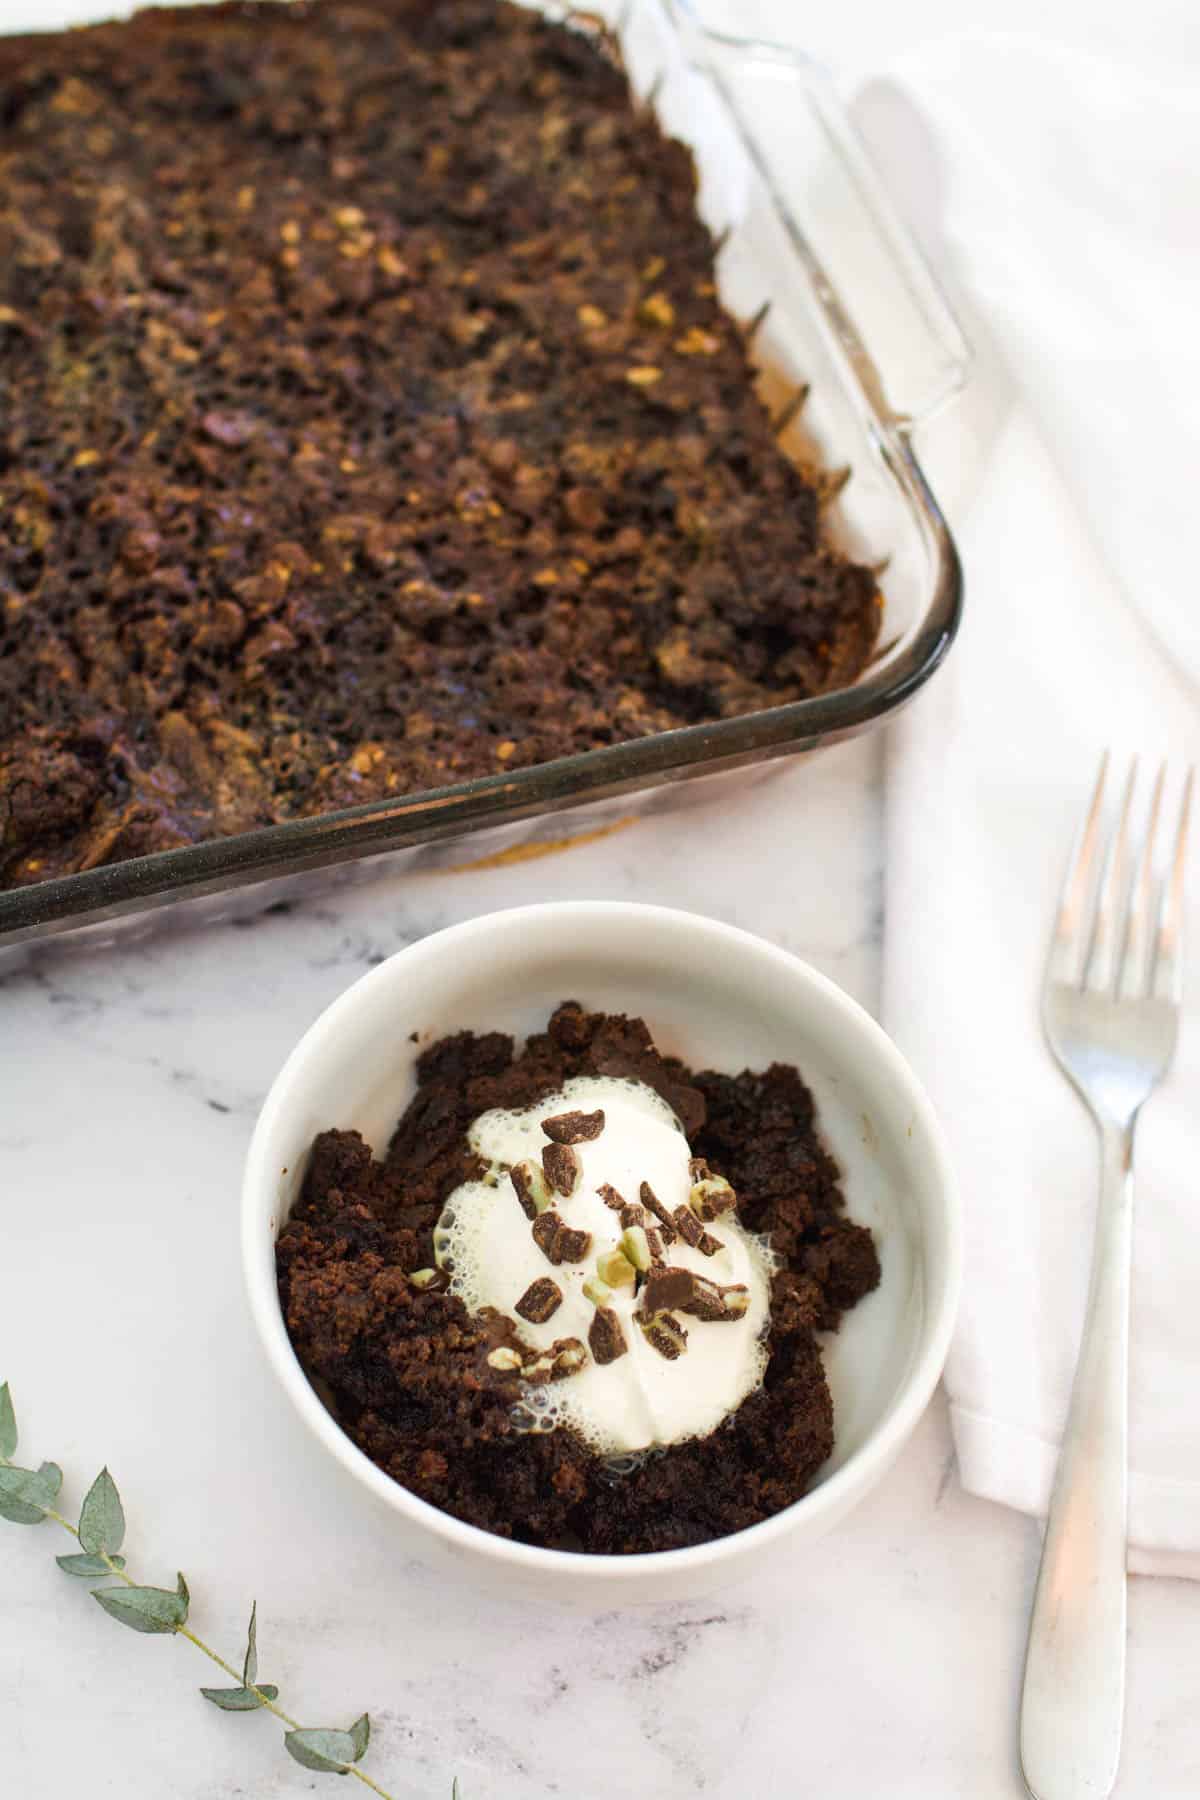 A serving of a chocolate peppermint dump cake in a small white bowl next to the baking dish.